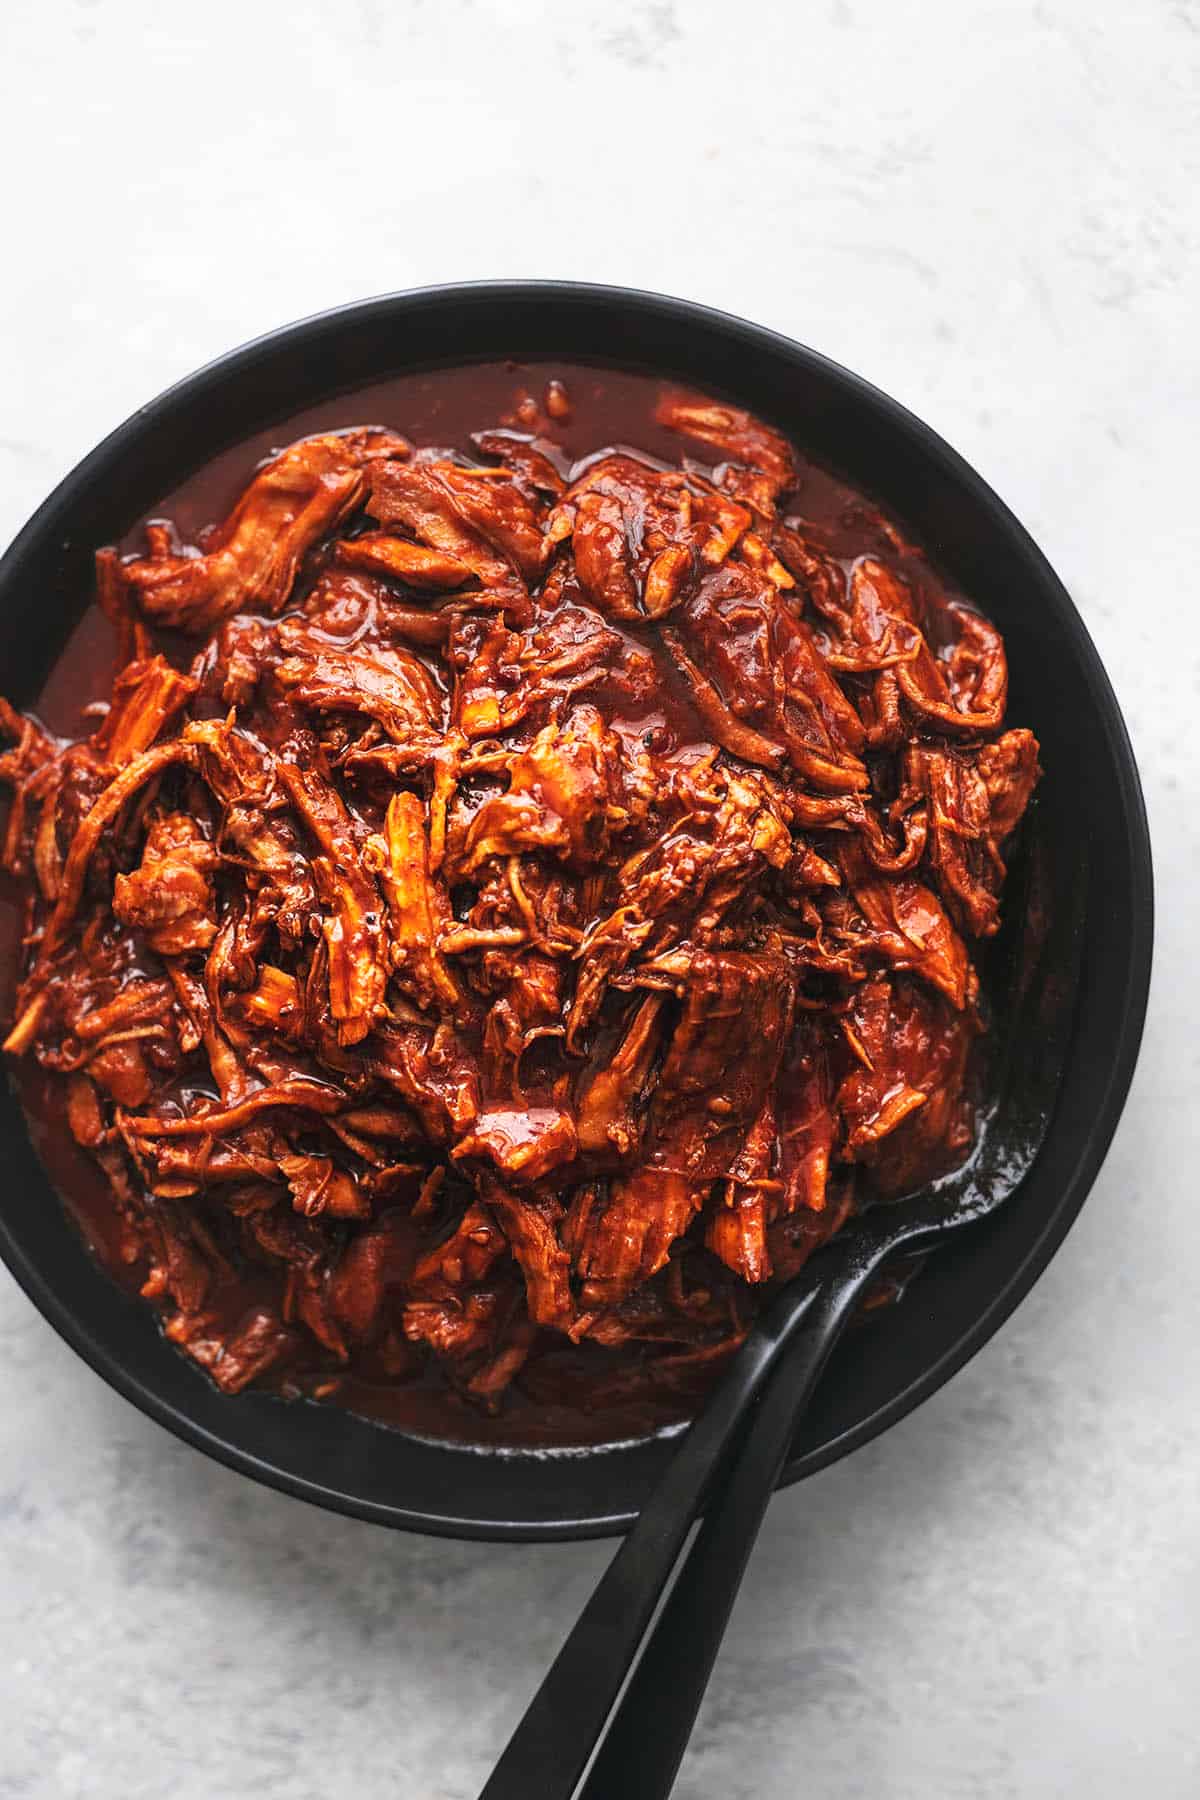 top view of pulled pork with forks on a plate.